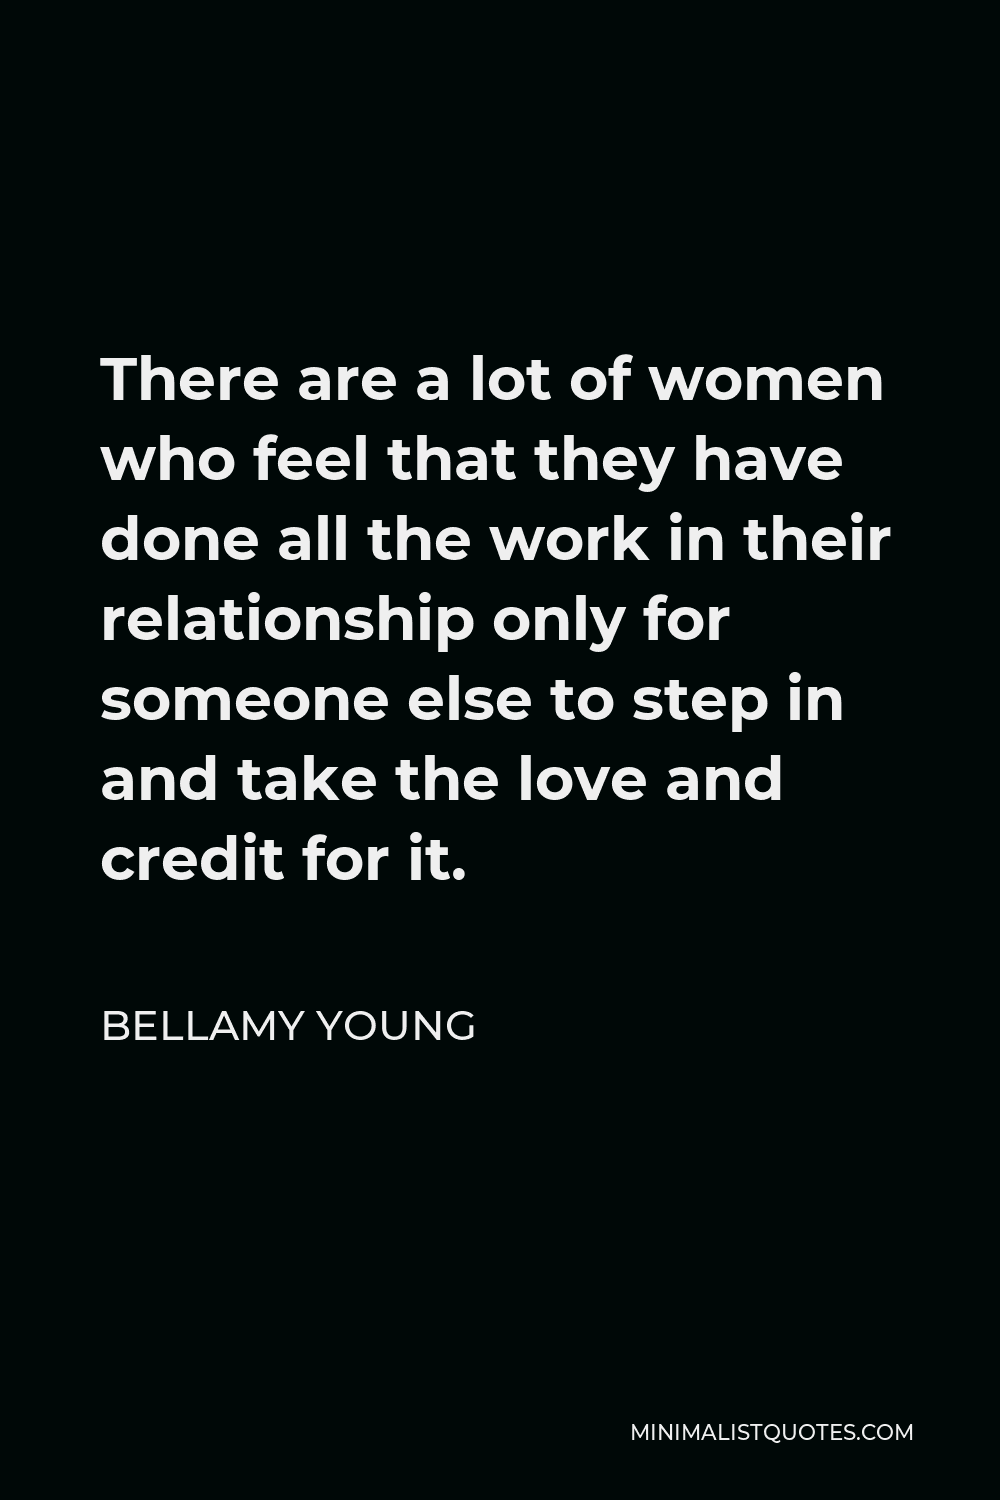 Bellamy Young Quote - There are a lot of women who feel that they have done all the work in their relationship only for someone else to step in and take the love and credit for it.